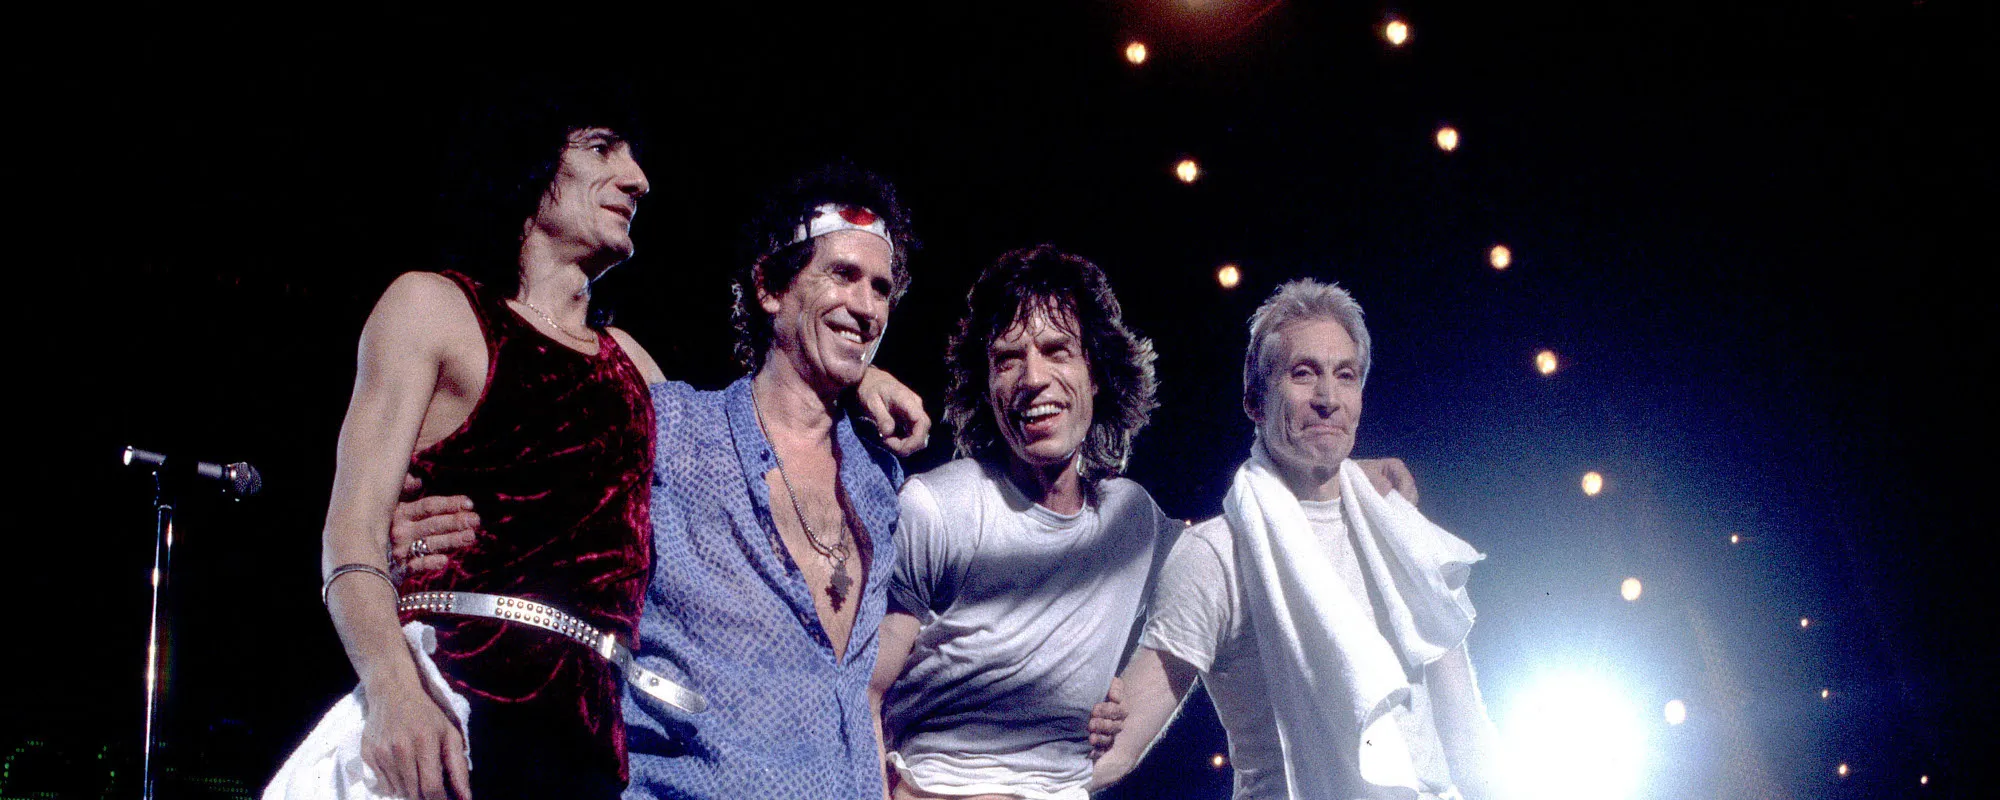 Rolling Stones Guitarist Keith Richards Says He Misses Late Drummer Charlie Watts “Every Day”